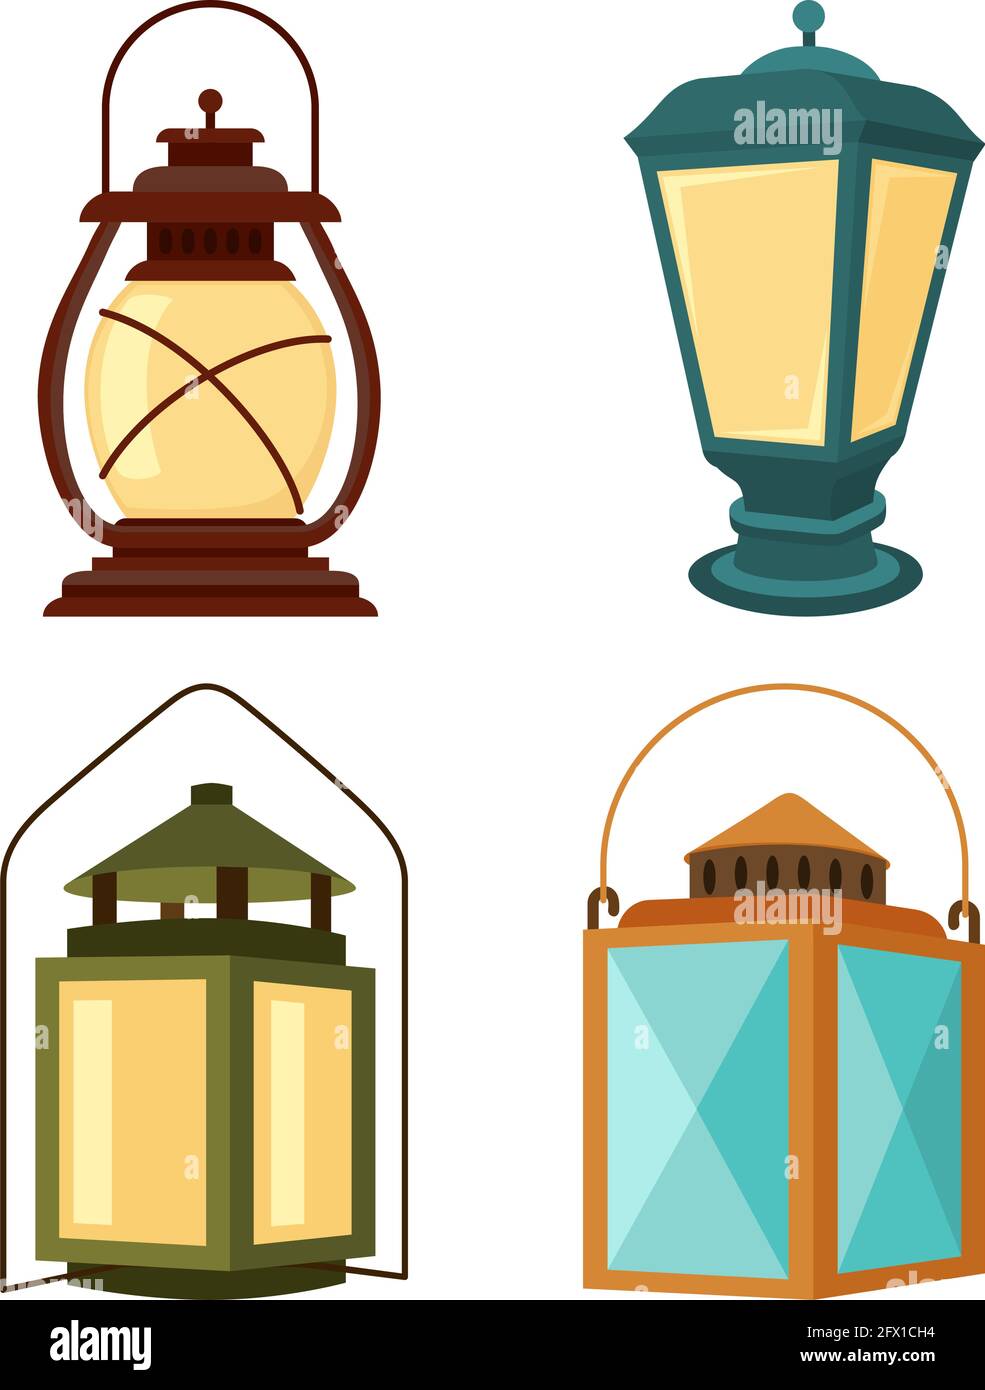 Colorful cartoon vintage lanterns set. Rustic outdoor party decor. Vintage themed vector illustration for icon, site label, gift car or invitation dec Stock Vector